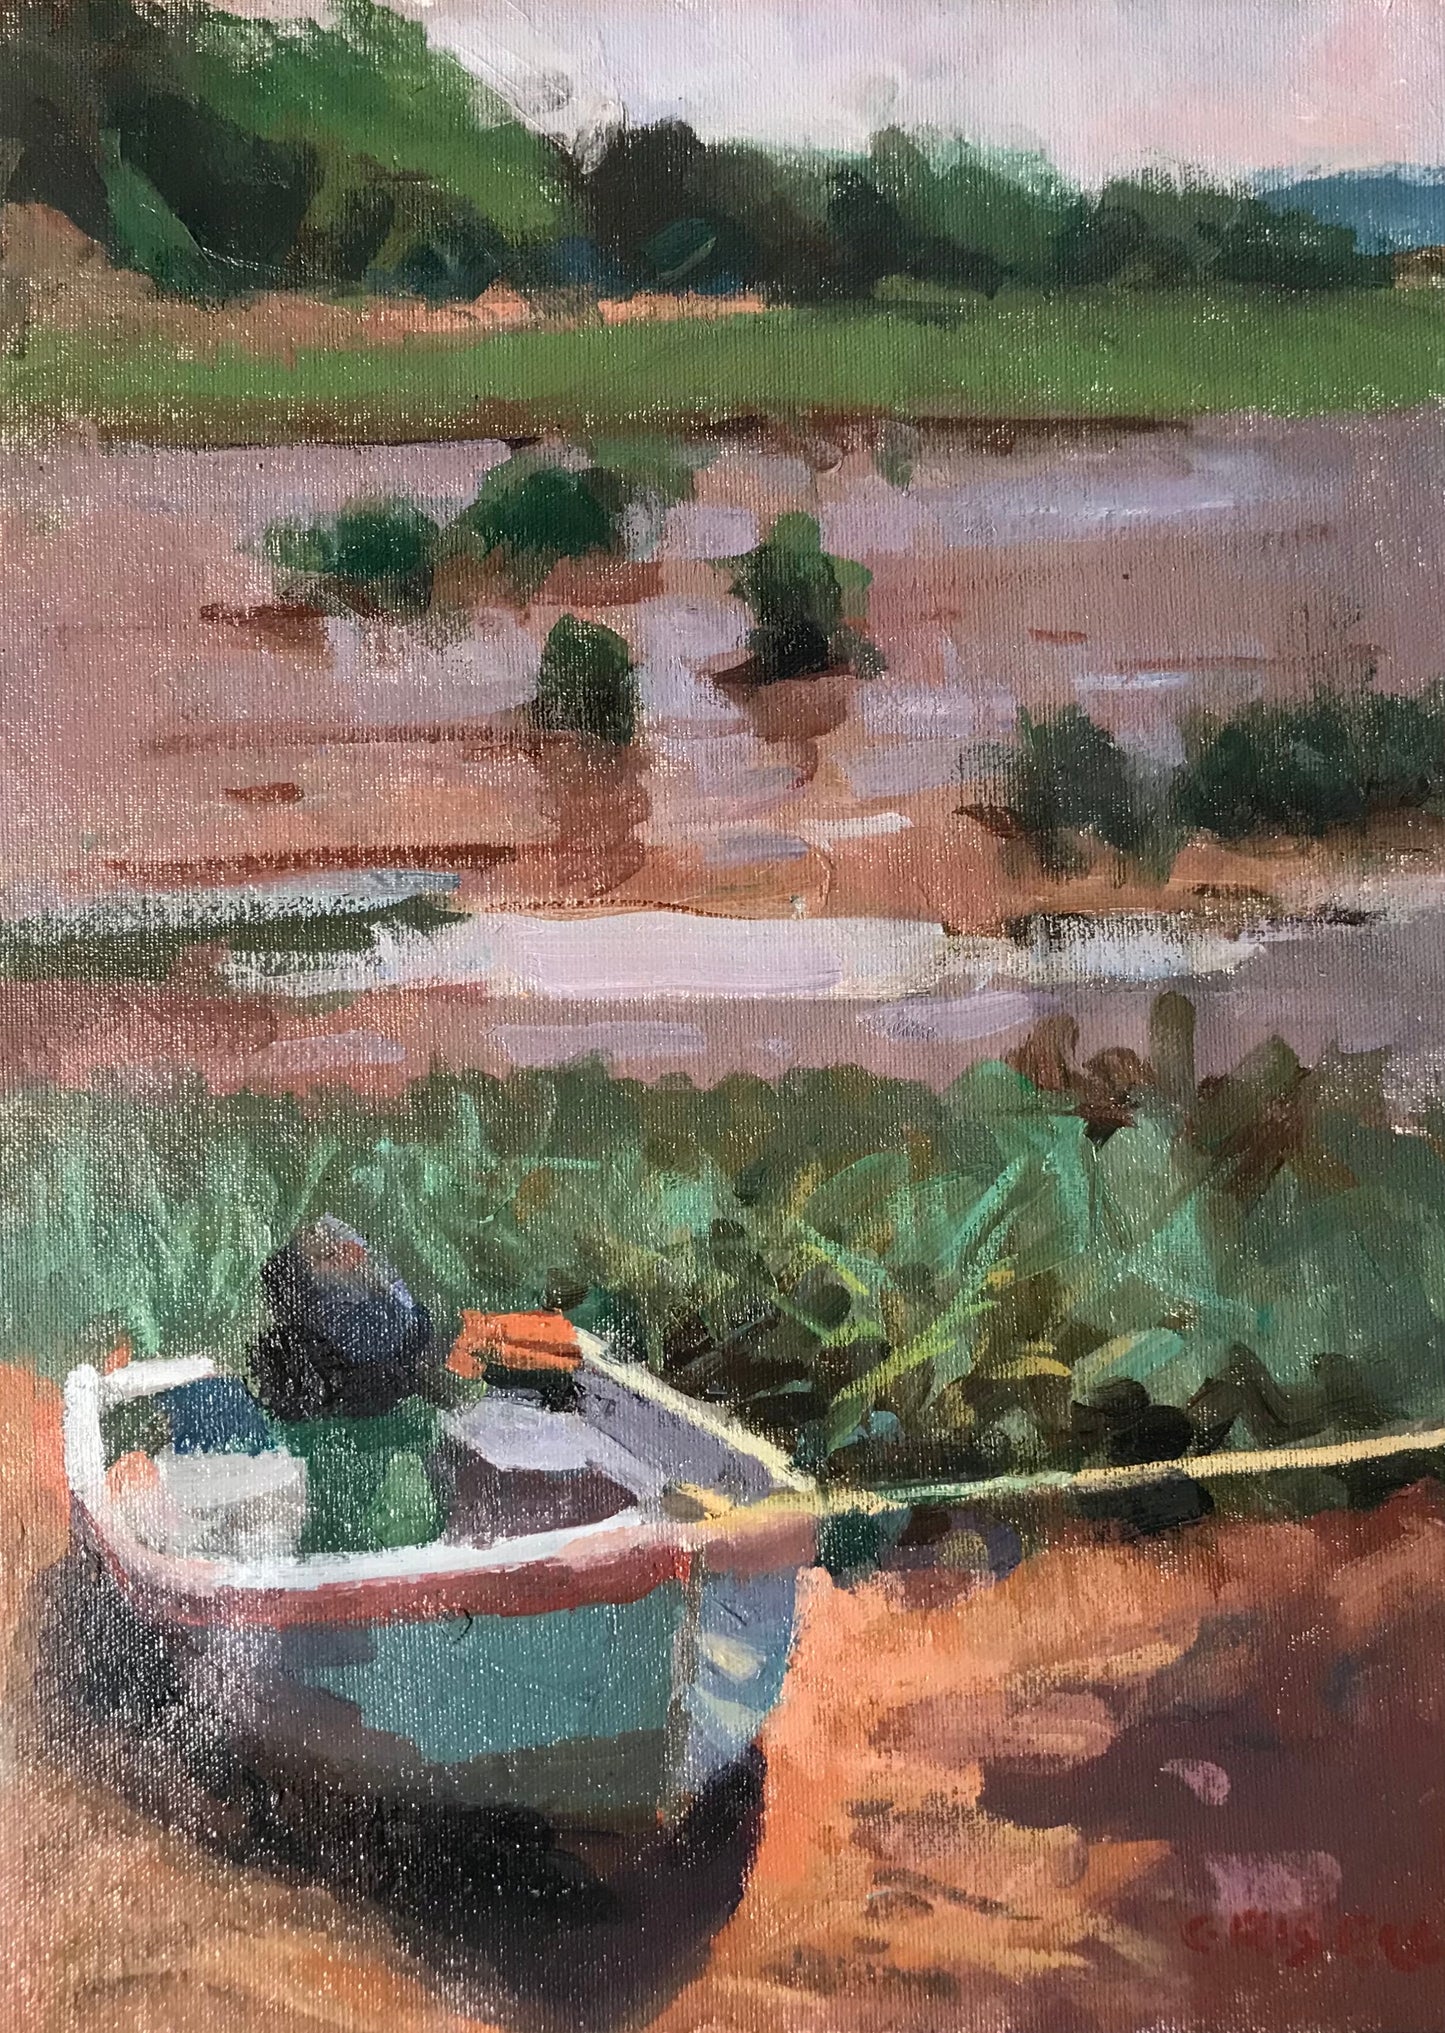 Little Blue Rowboat (16 x 12 Inches)